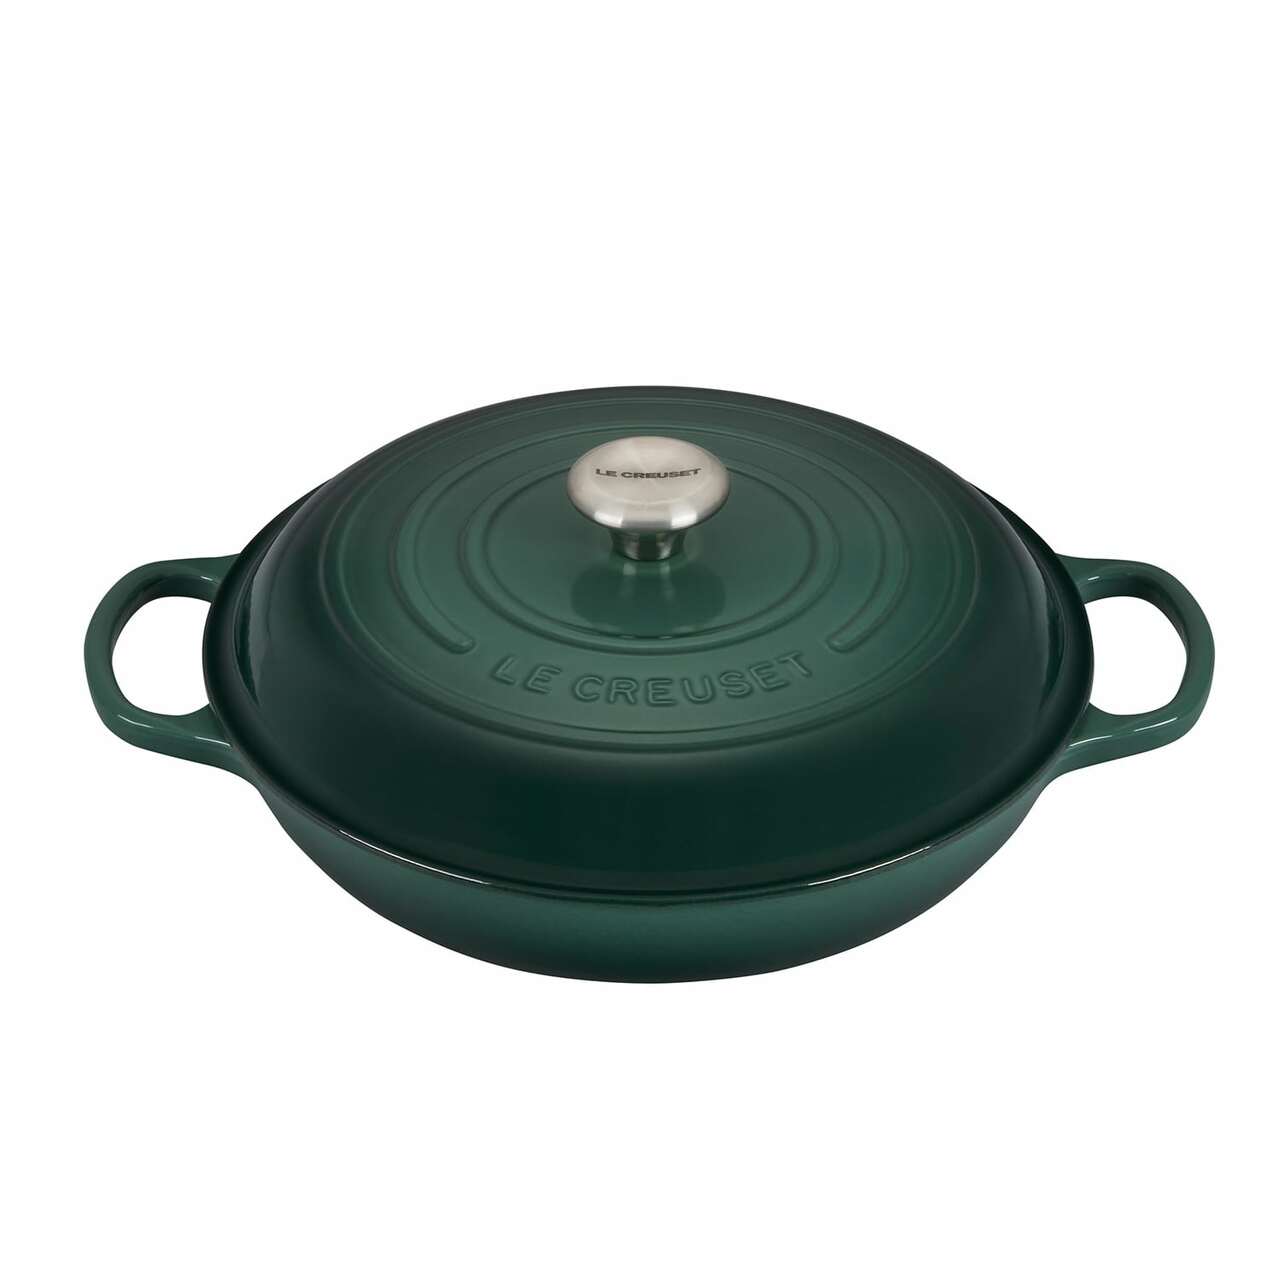 3.5 Qt. Braiser with Glass Lid (Turquoise), Staub